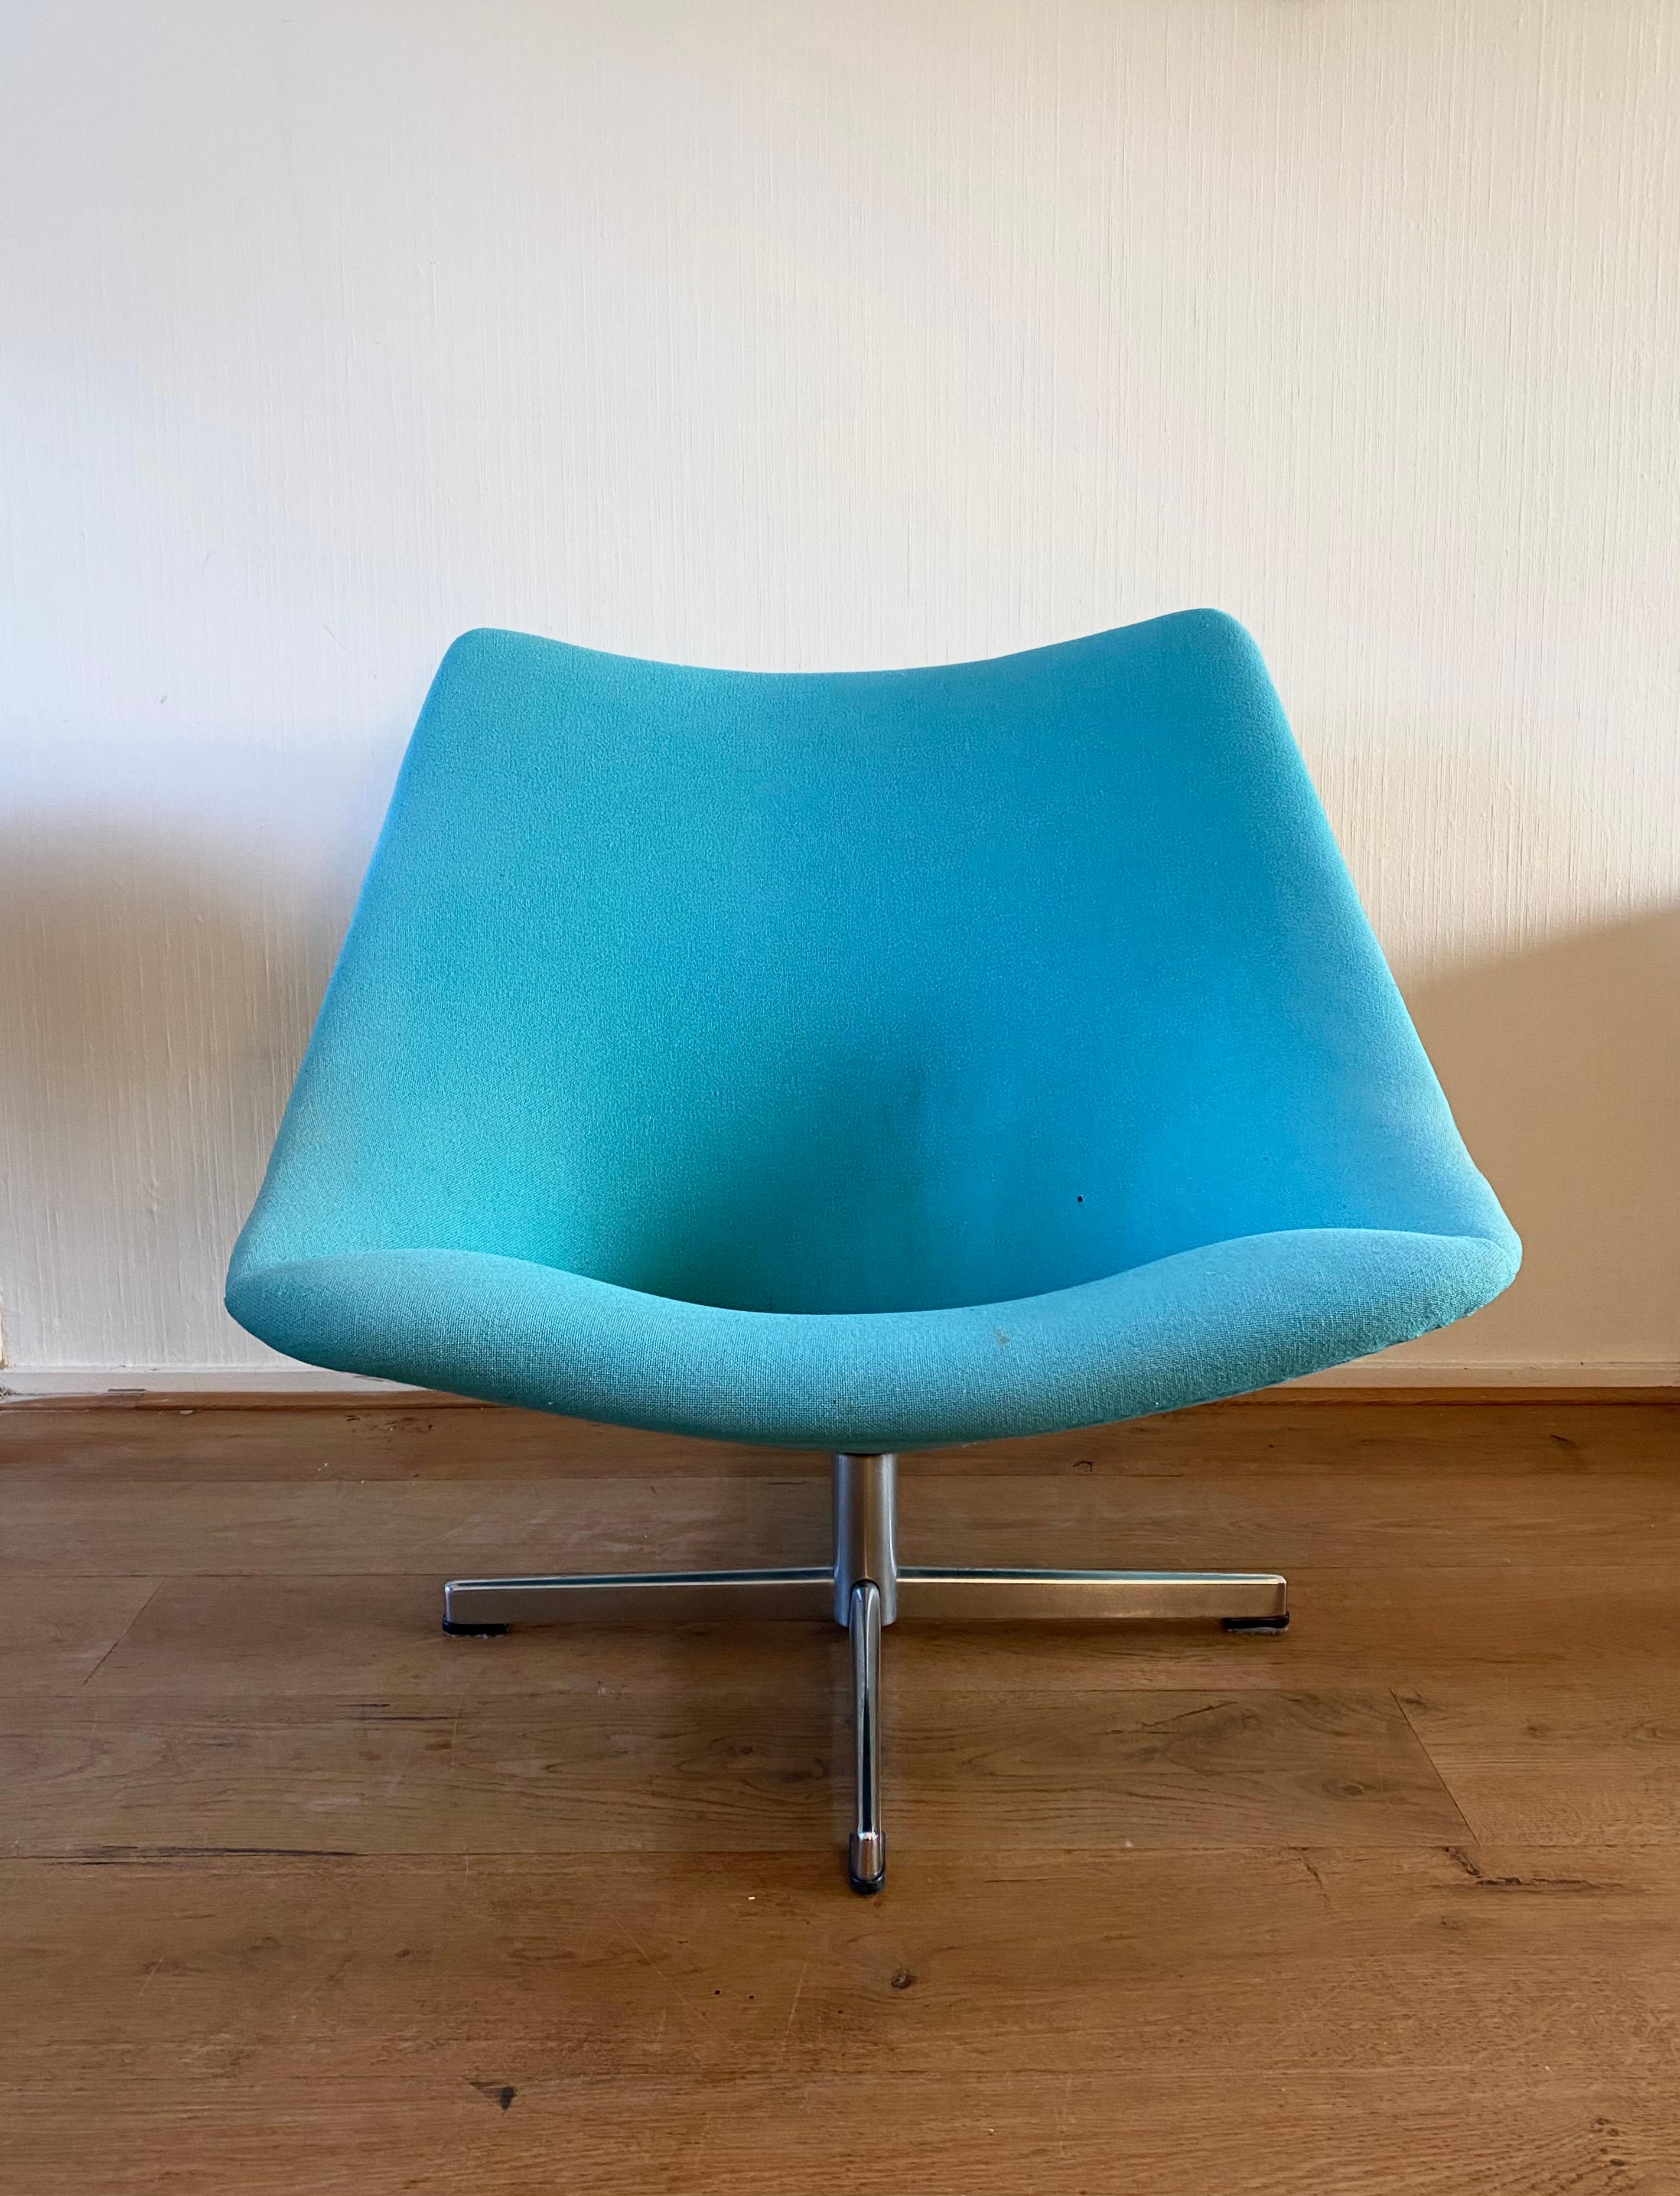 Unusual Version of the Oyster chair by Pierre Paulin for Artifort. The chairs features a large comfortable seating with the original Mint/ Aqua colored Fabric and a Metal star or Swivel foot, Base. The piece remains in very good condition, however